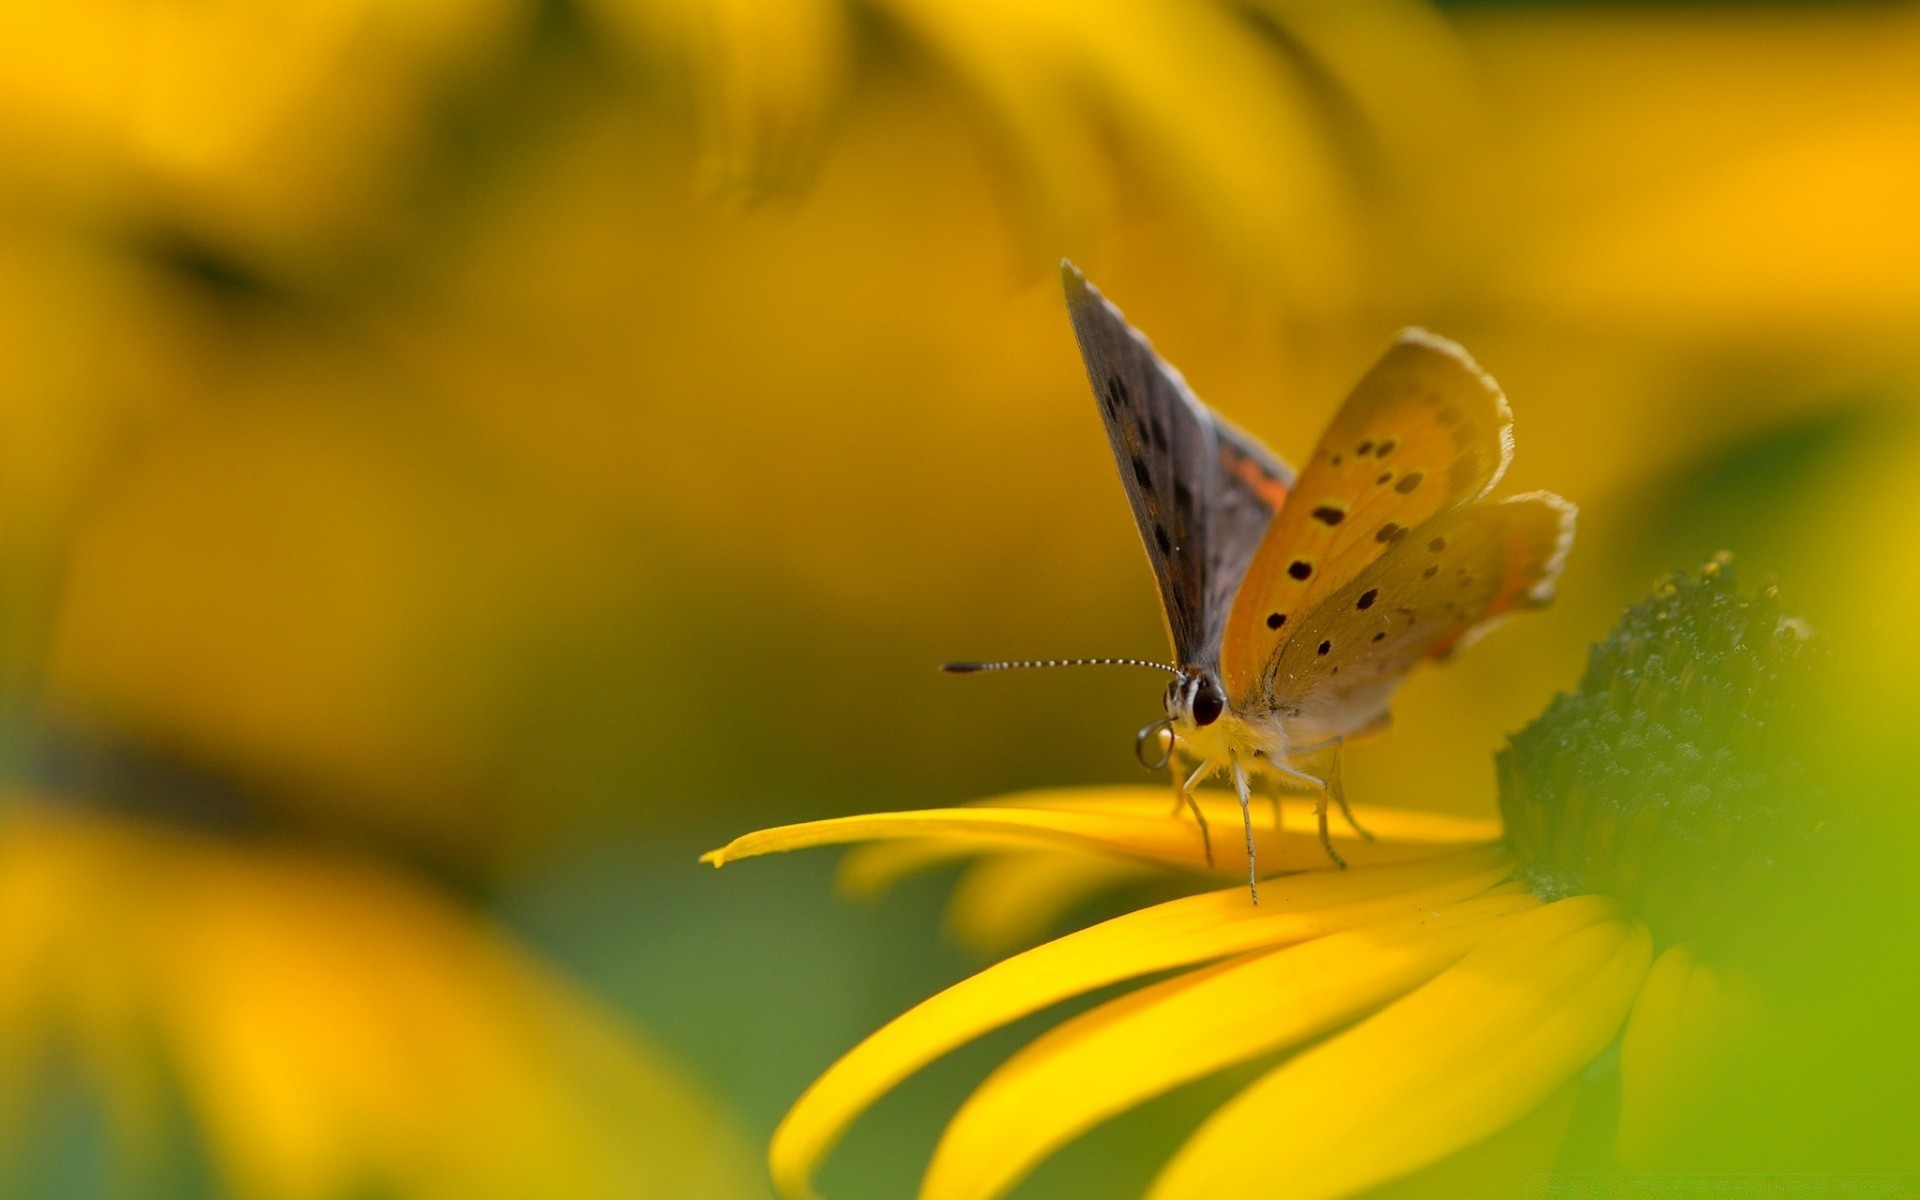 insects nature butterfly insect flower summer bright outdoors color leaf flora garden fair weather close-up blur